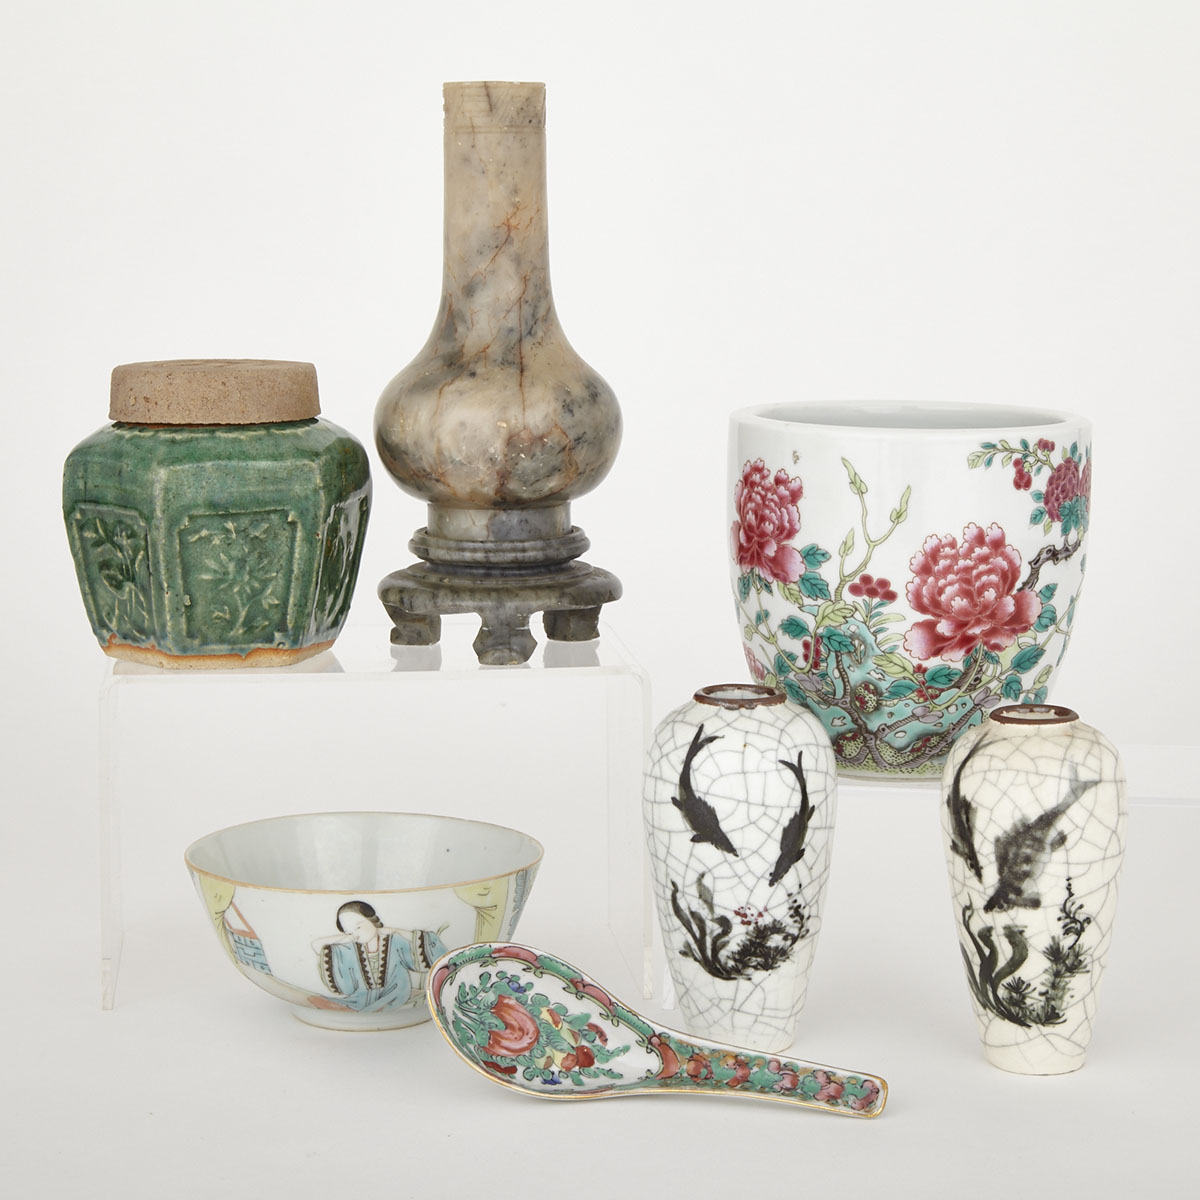 Group of Seven Asian Wares